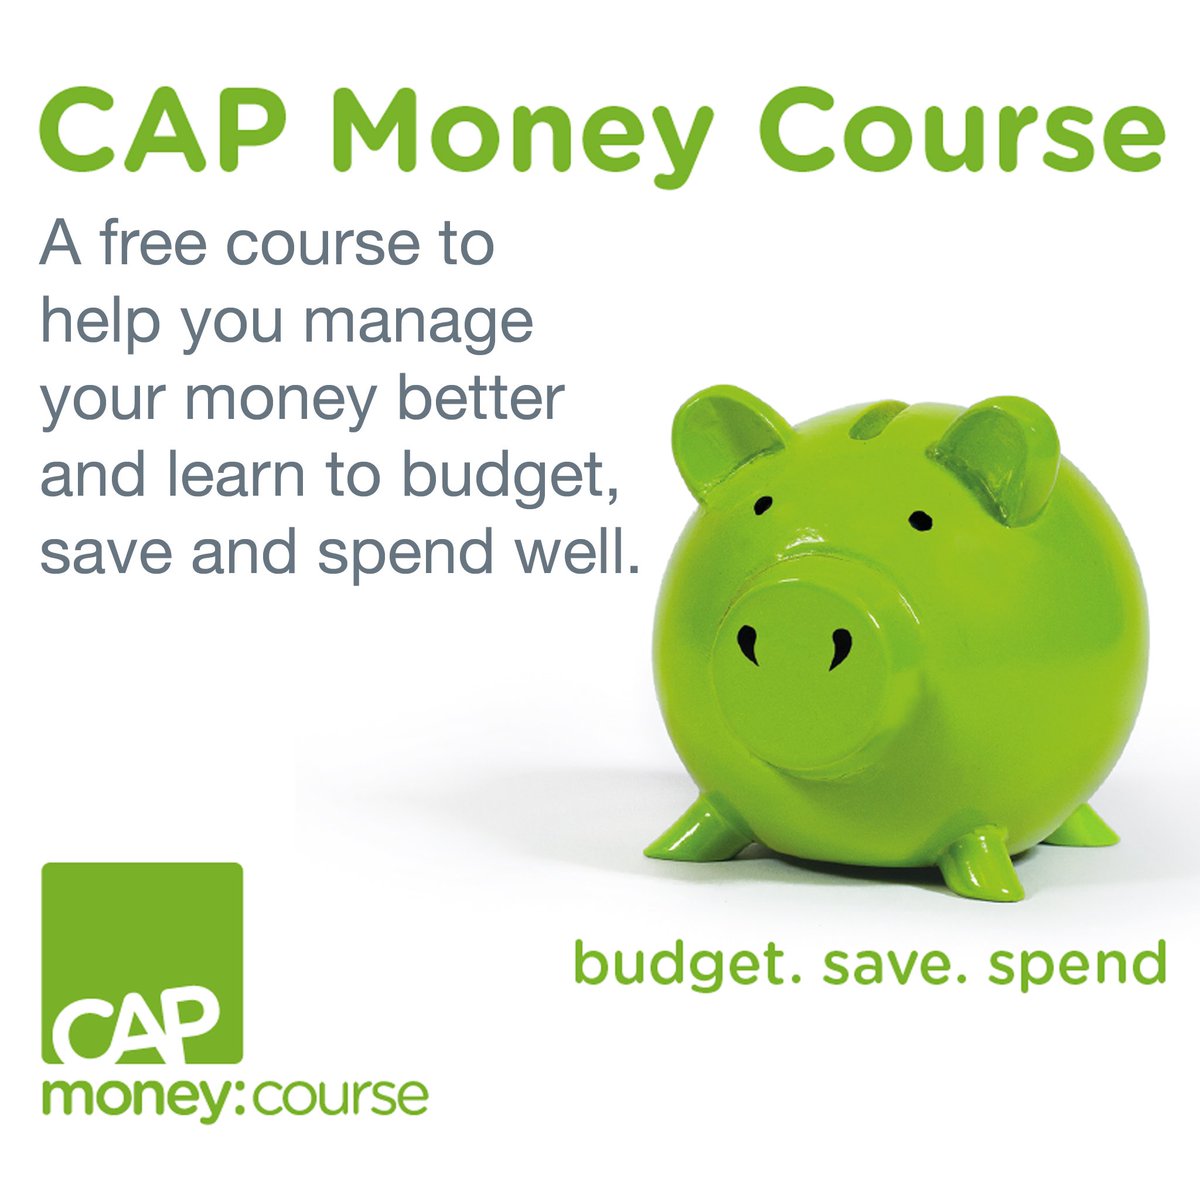 This is a time of great uncertainty and financial difficulty for many. It’s not too late to join our free CAP Money course this Thursday. Cap@stnicholastooting.org.uk #CAPmoneycourse #budget #save #spend #lockdown #moneyworries #stnicholastooting #tooting @tootingnewsie @CAPuk